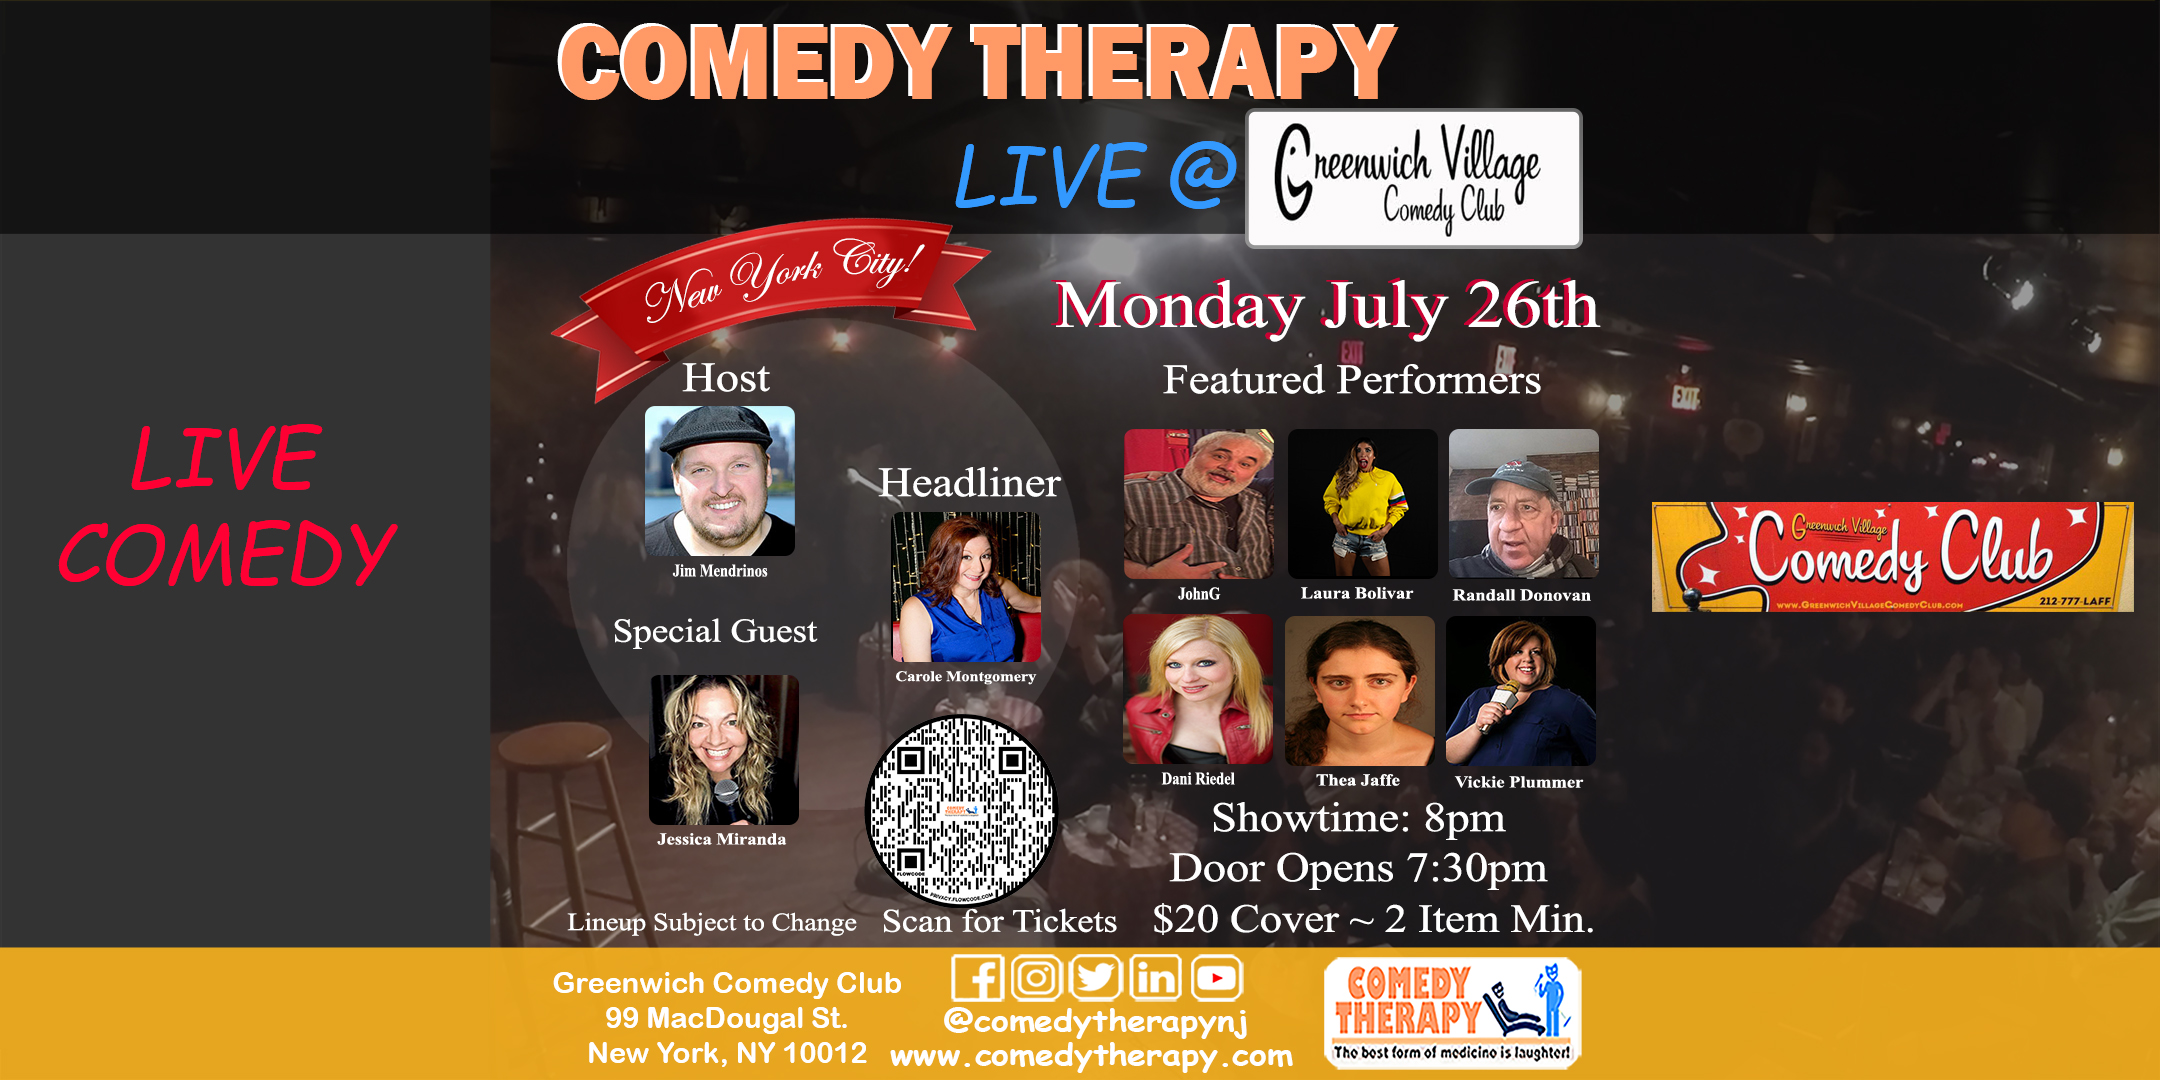 Comedy Therapy Live at Greenwich Comedy Club